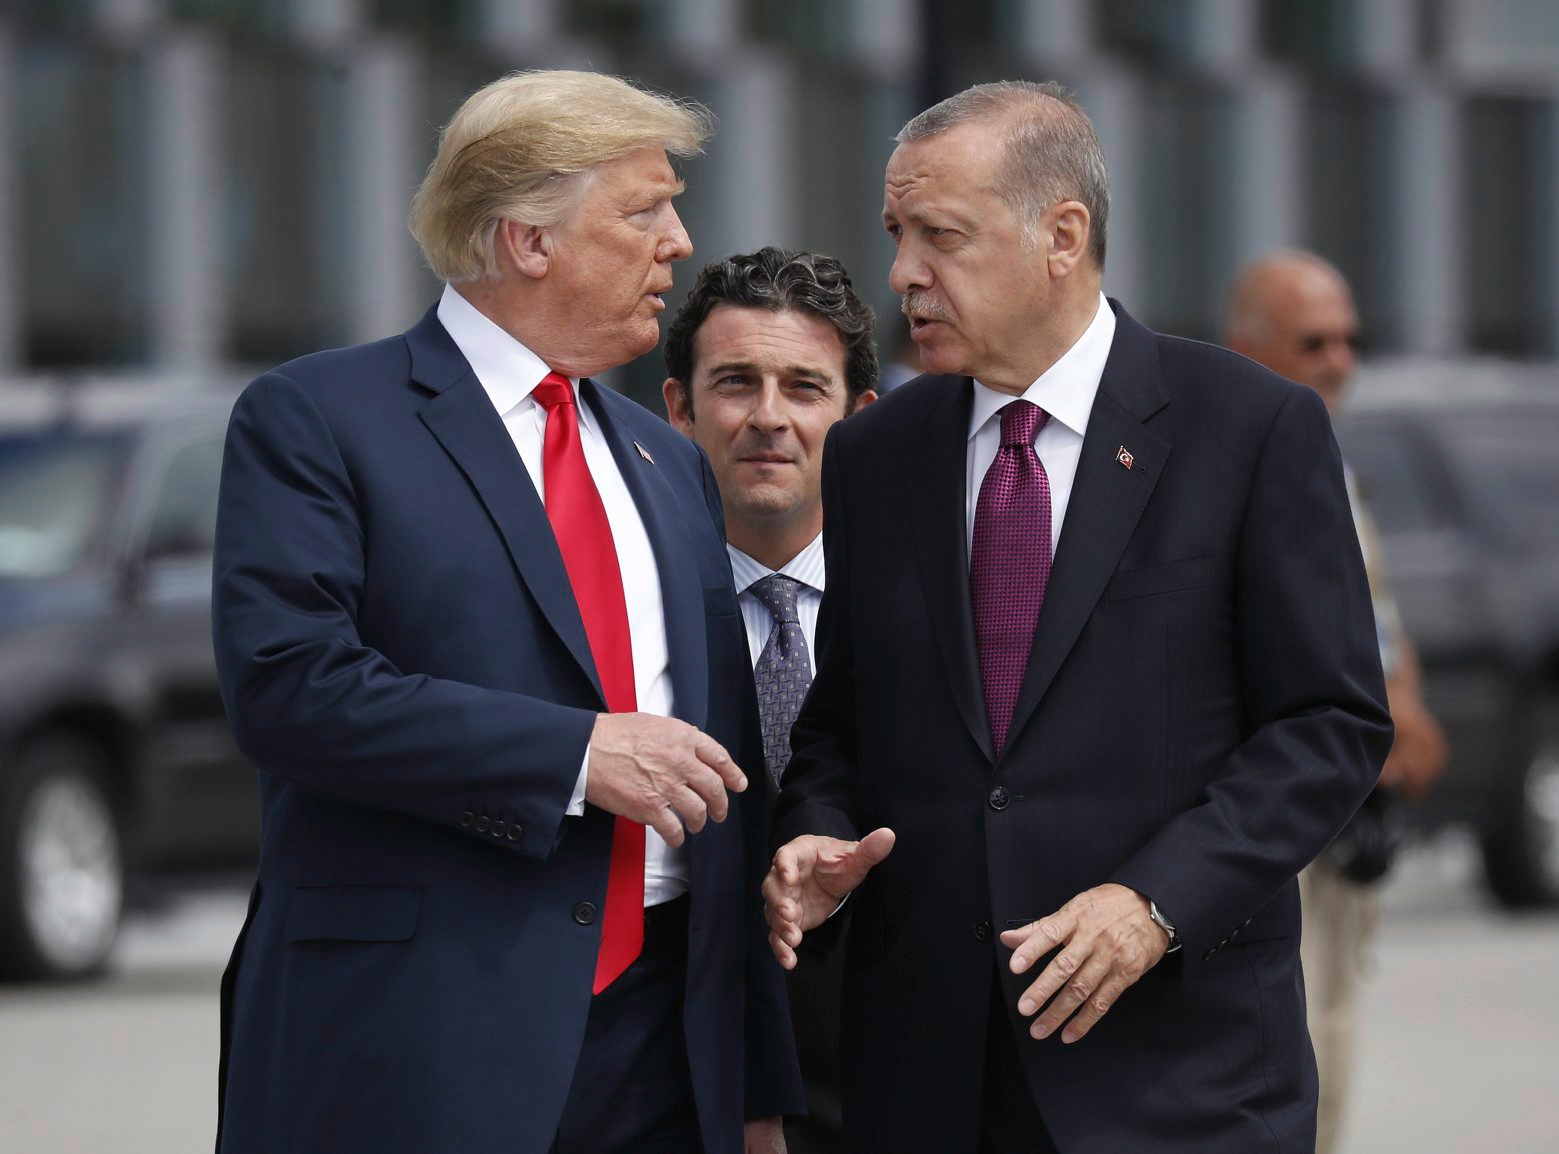 FILE - In this Wednesday, July 11, 2018, file photo, President Donald Trump, left, talks with Turkey's President Recep Tayyip Erdogan, as they arrive together for a family photo at a summit of heads of state and government at NATO headquarters in Brussels. The White House says Turkey will soon invade Northern Syria, casting uncertainty on the fate of the Kurdish fighters allied with the U.S. against in a campaign against the Islamic State group. (AP Photo/Pablo Martinez Monsivais, File)
Donald Trump,Recep Tayyip Erdogan United States Syria